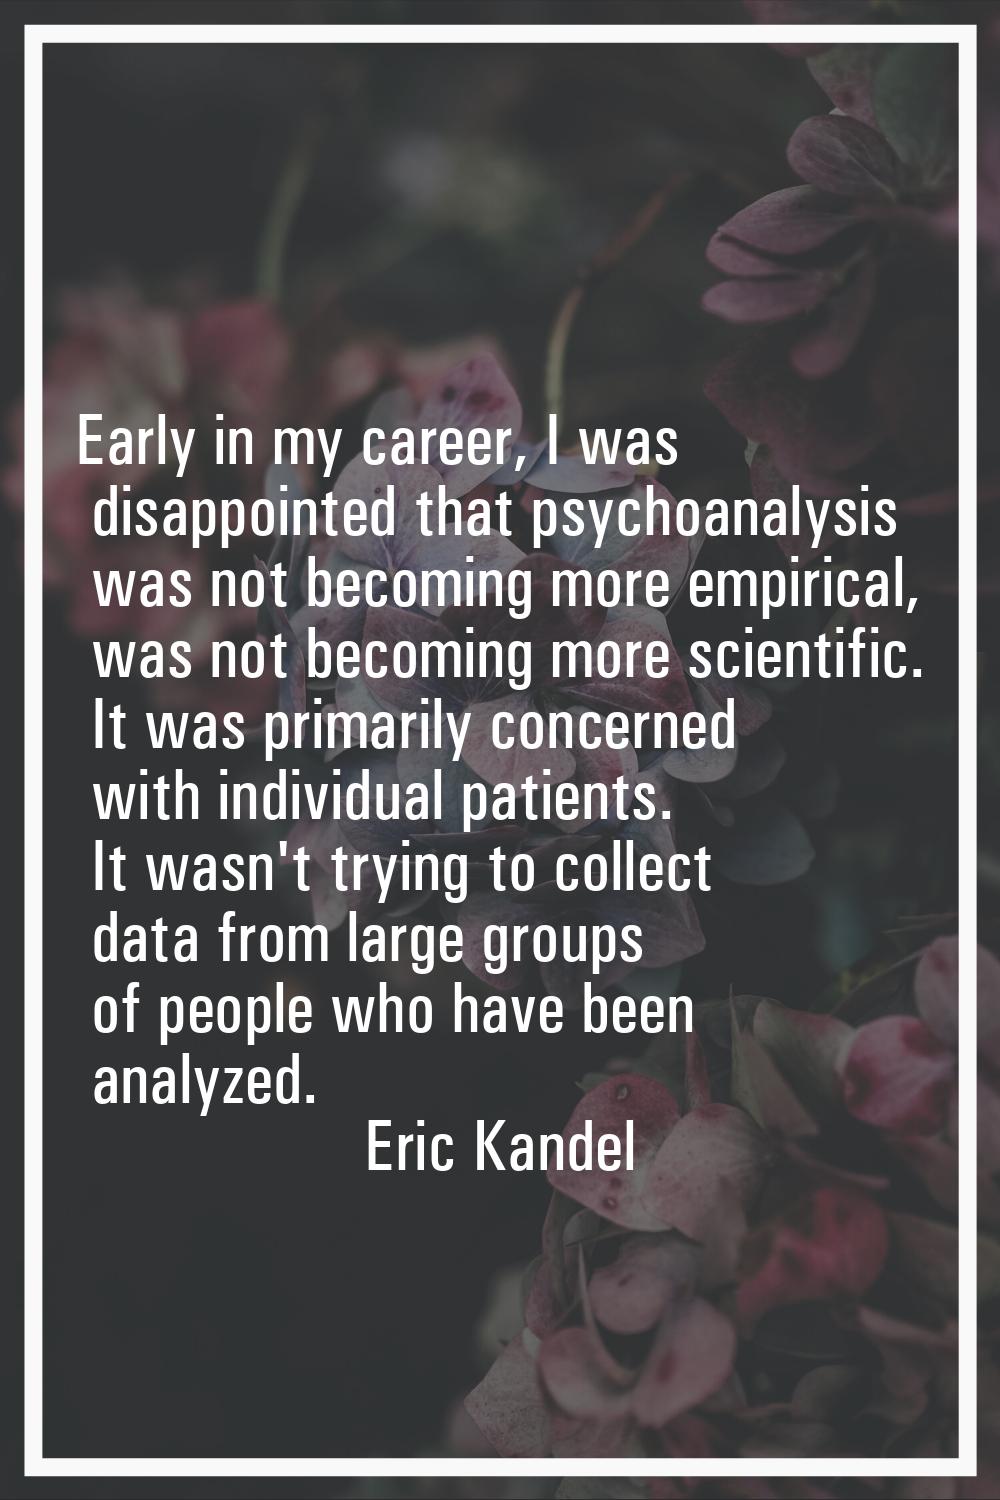 Early in my career, I was disappointed that psychoanalysis was not becoming more empirical, was not